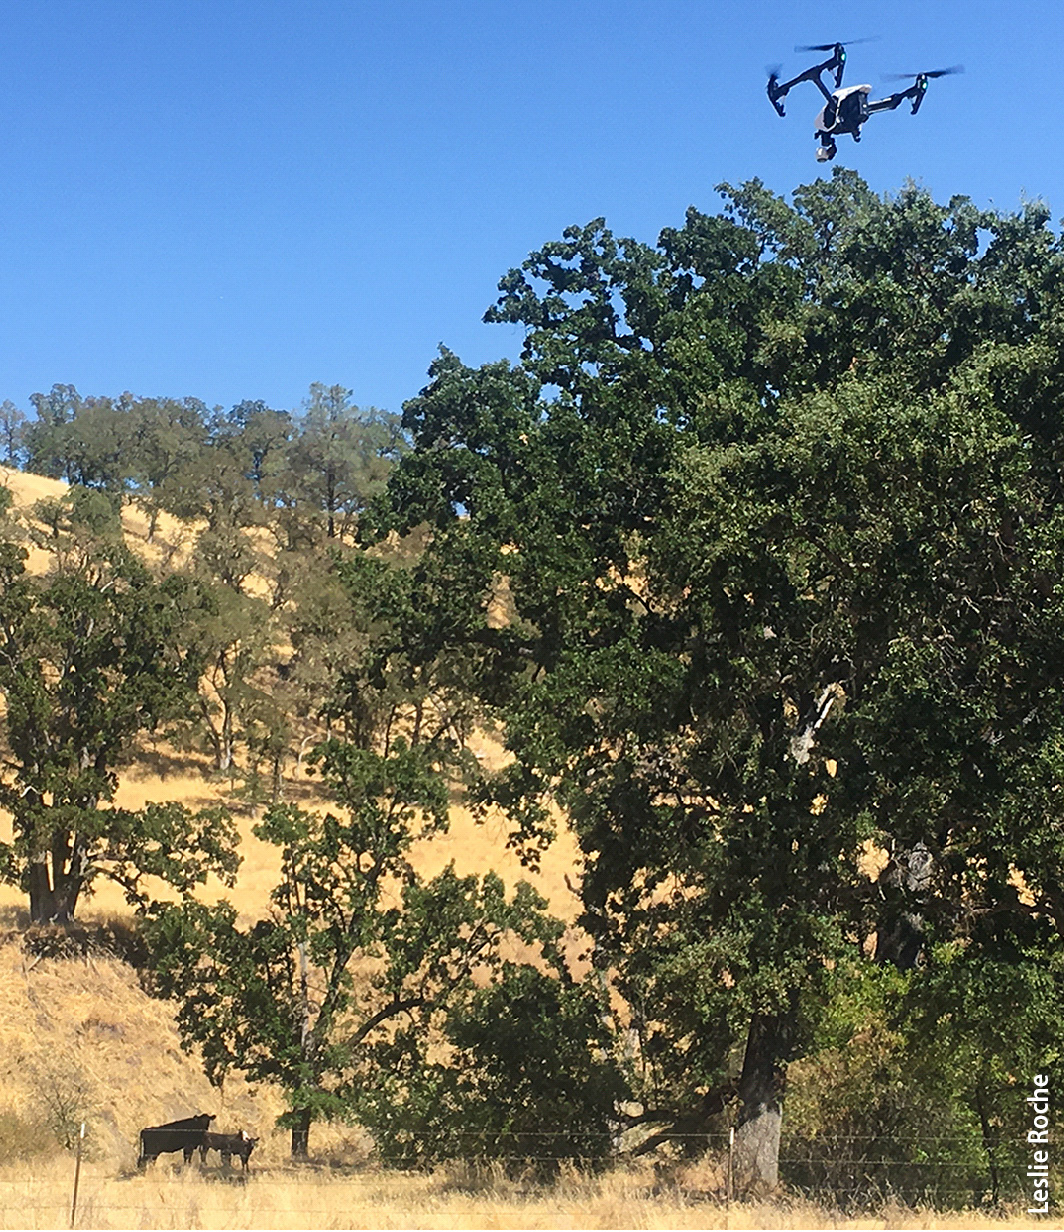 A DJI Inspire 1 drone flies over cattle for a rangeland ecology study at Gamble Ranch in Napa County.